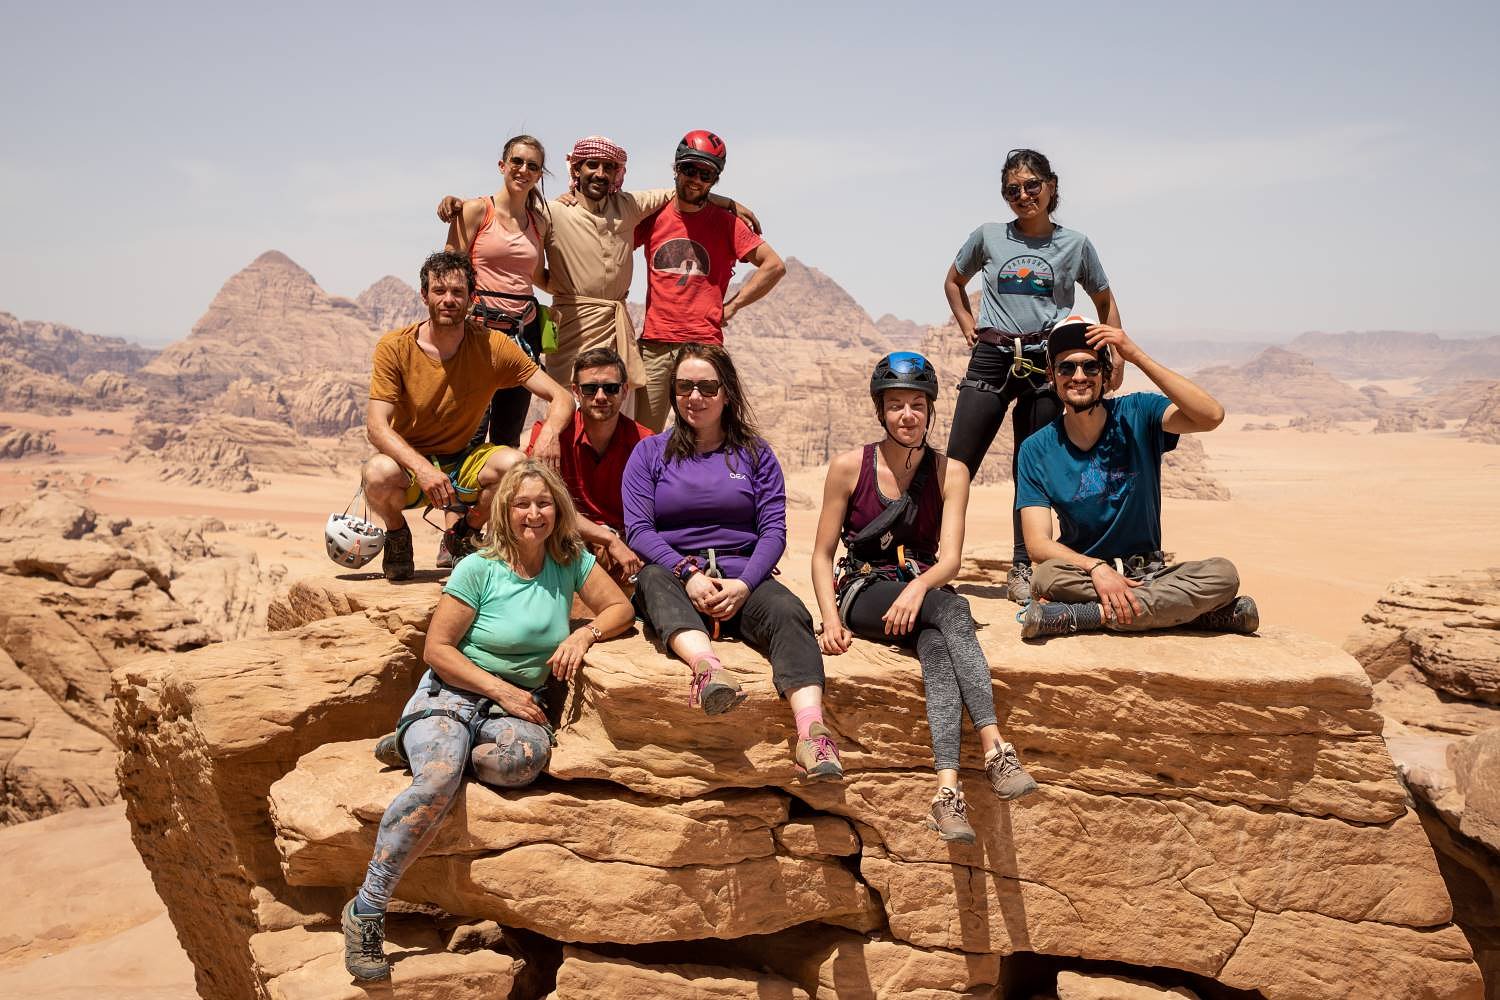 A group of climbers smiling at the camera during a trip to Jordan